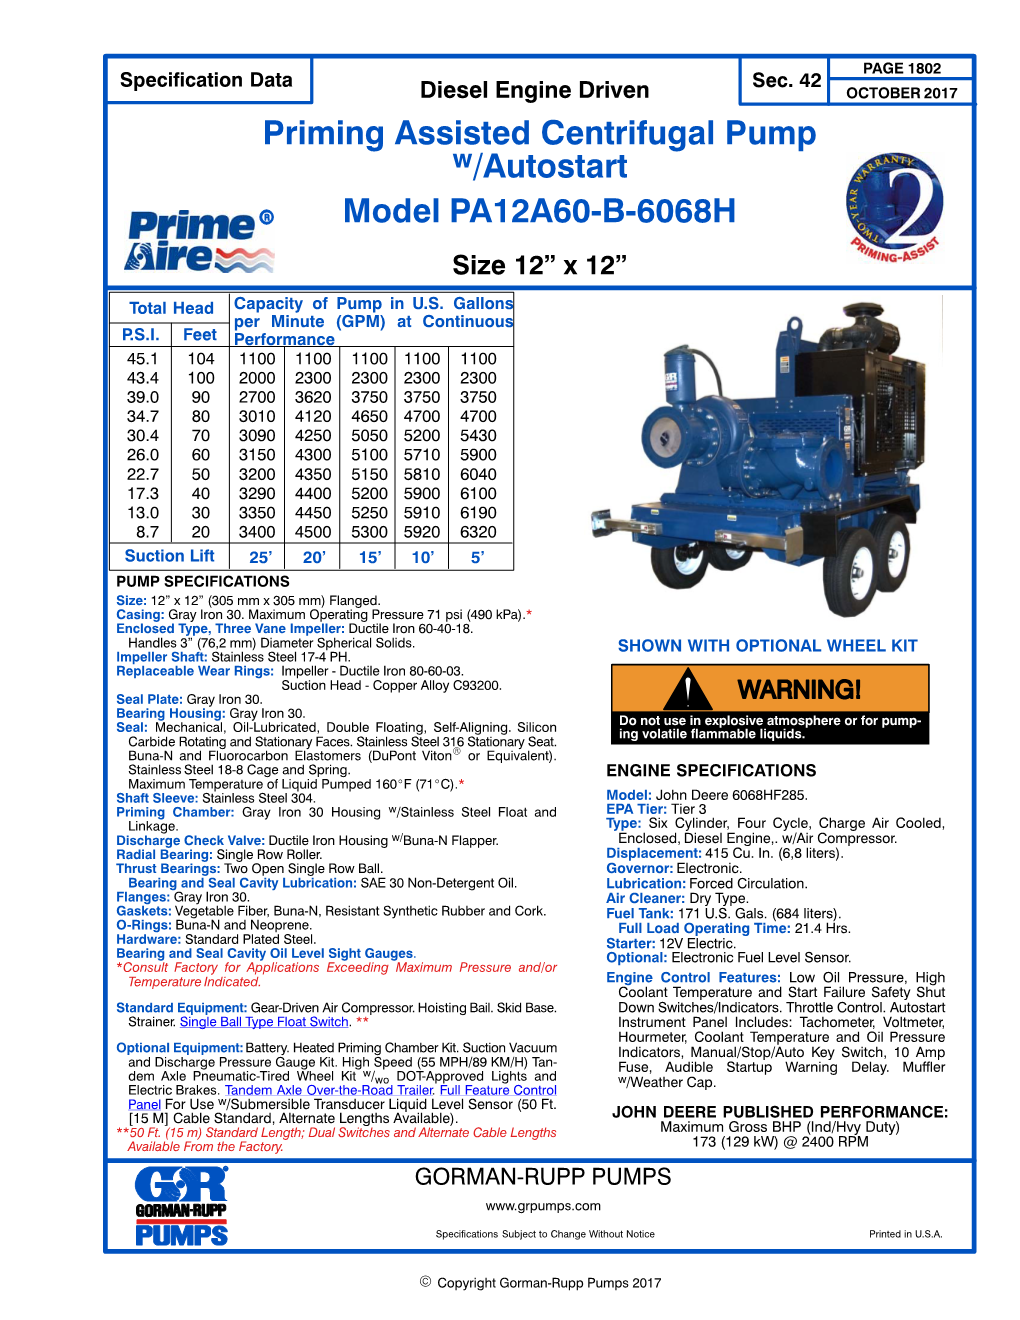 Priming Assisted Centrifugal Pump /Autostart Model PA12A60‐B‐6068H